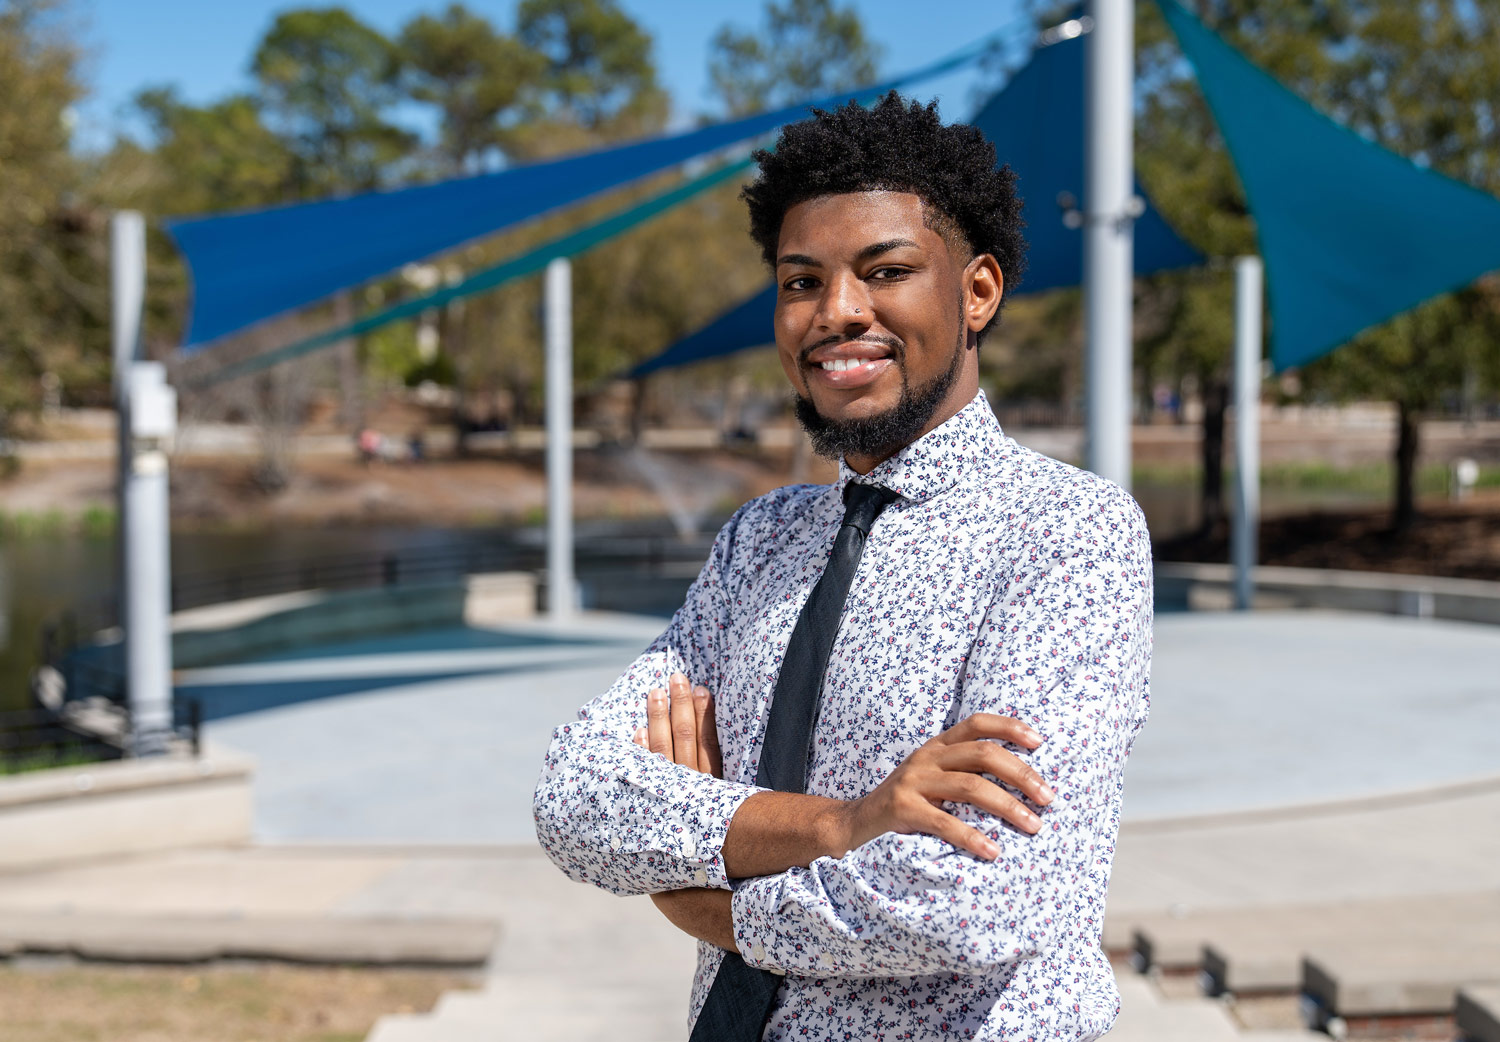 Darron Jenkins works with campus partners to design smaller communities where students can learn, grow and find support to help them succeed.